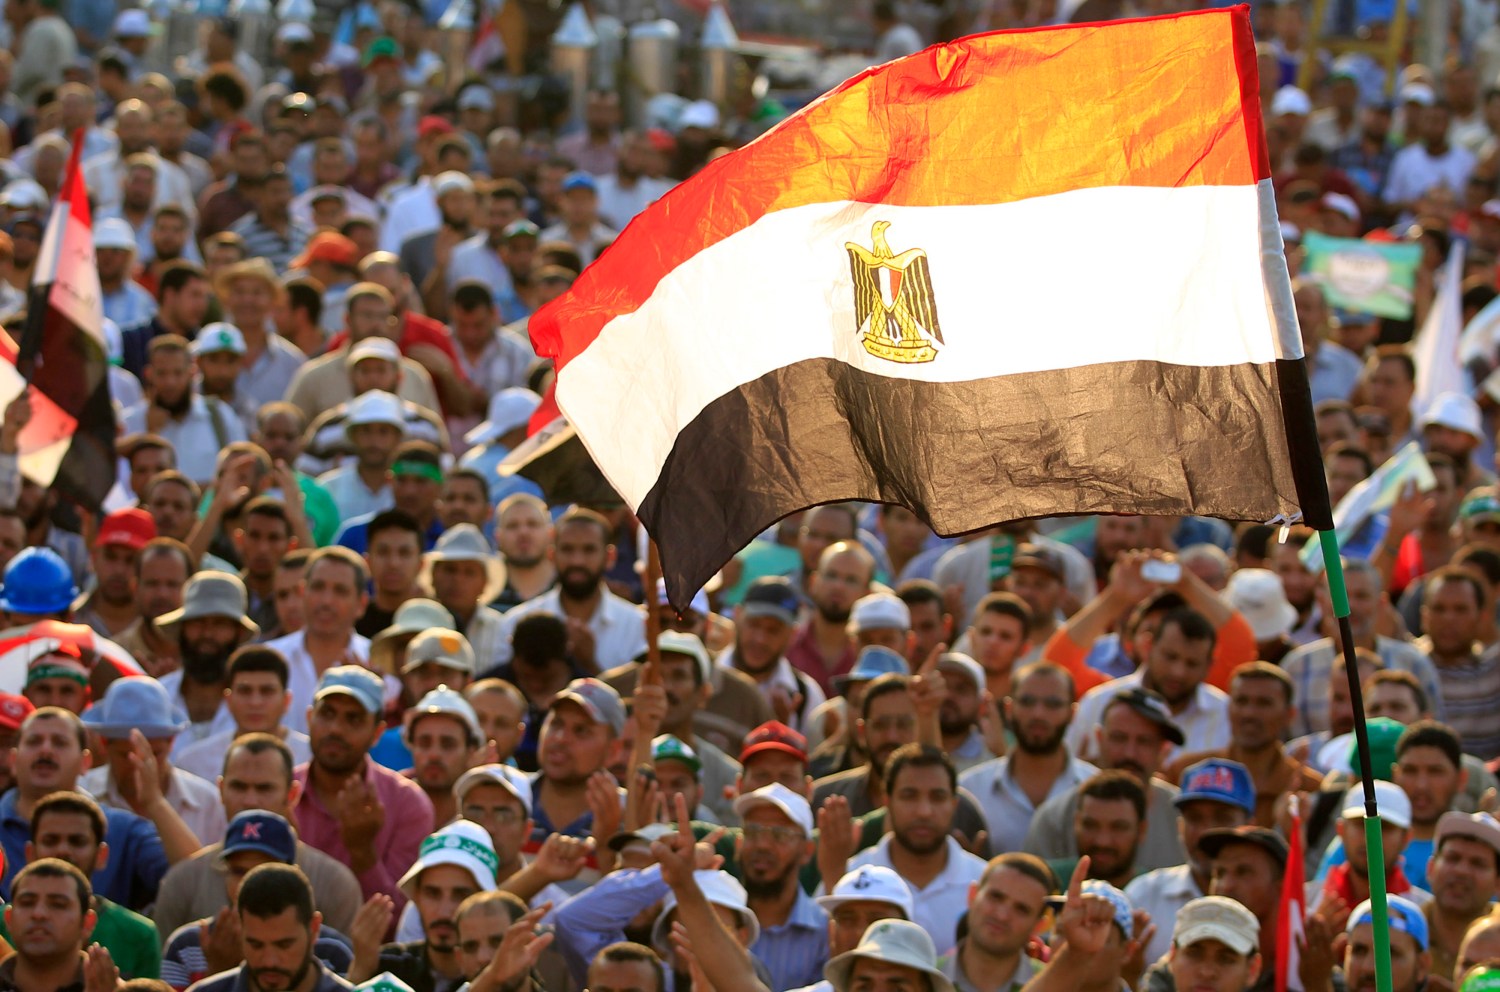 Members of the Muslim Brotherhood and supporters of Egyptian President Mohamed Mursi shout slogans and waves an Egyptian flag during a protest around the Raba El-Adwyia mosque square in Nasr City, in the suburb of Cairo June 29, 2013. Mass demonstrations across Egypt on Sunday may determine its future, two and half years after people power toppled a dictator they called Pharaoh and ushered in a democracy crippled by bitter divisions. The protesters' goal again is to unseat a president, this time their first freely elected leader, the Islamist Mursi. Liberal leaders say nearly half the voting population - 22 million people - have signed a petition calling for change. REUTERS/Mohamed Abd El Ghany (EGYPT - Tags: POLITICS CIVIL UNREST) - RTX116HI